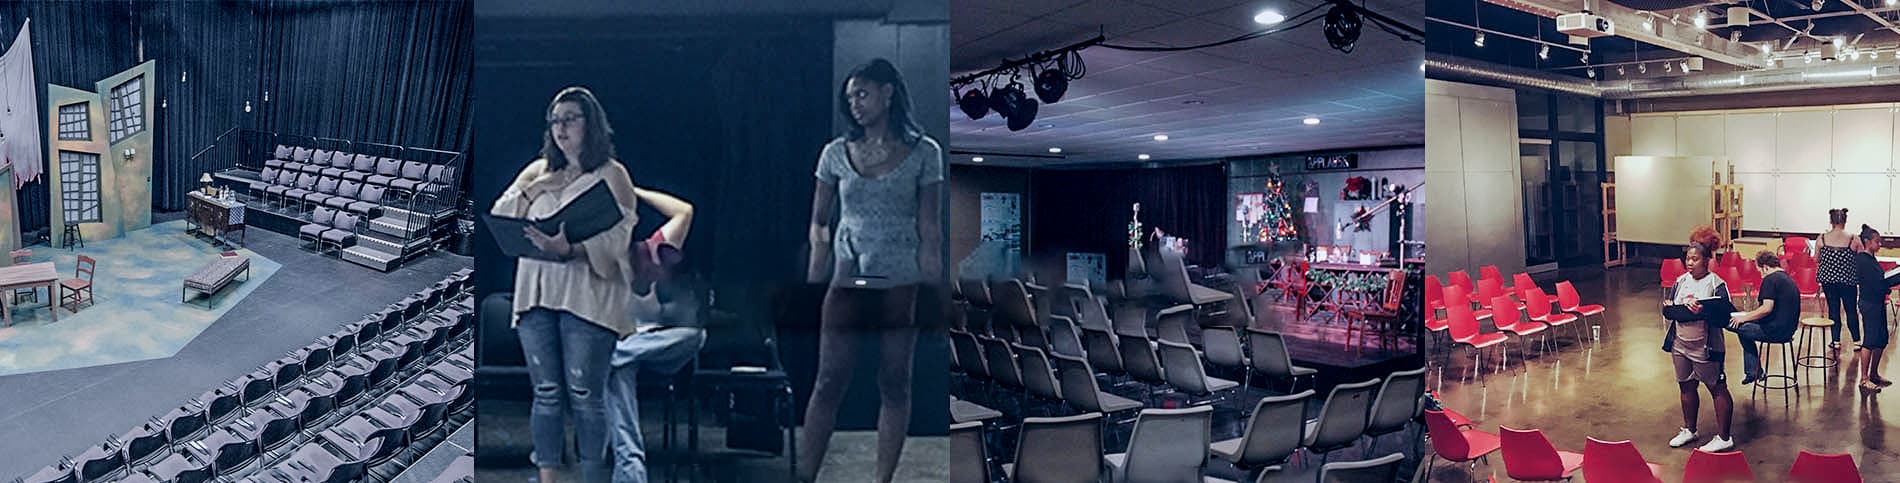 Photo collage of four performances spaces.